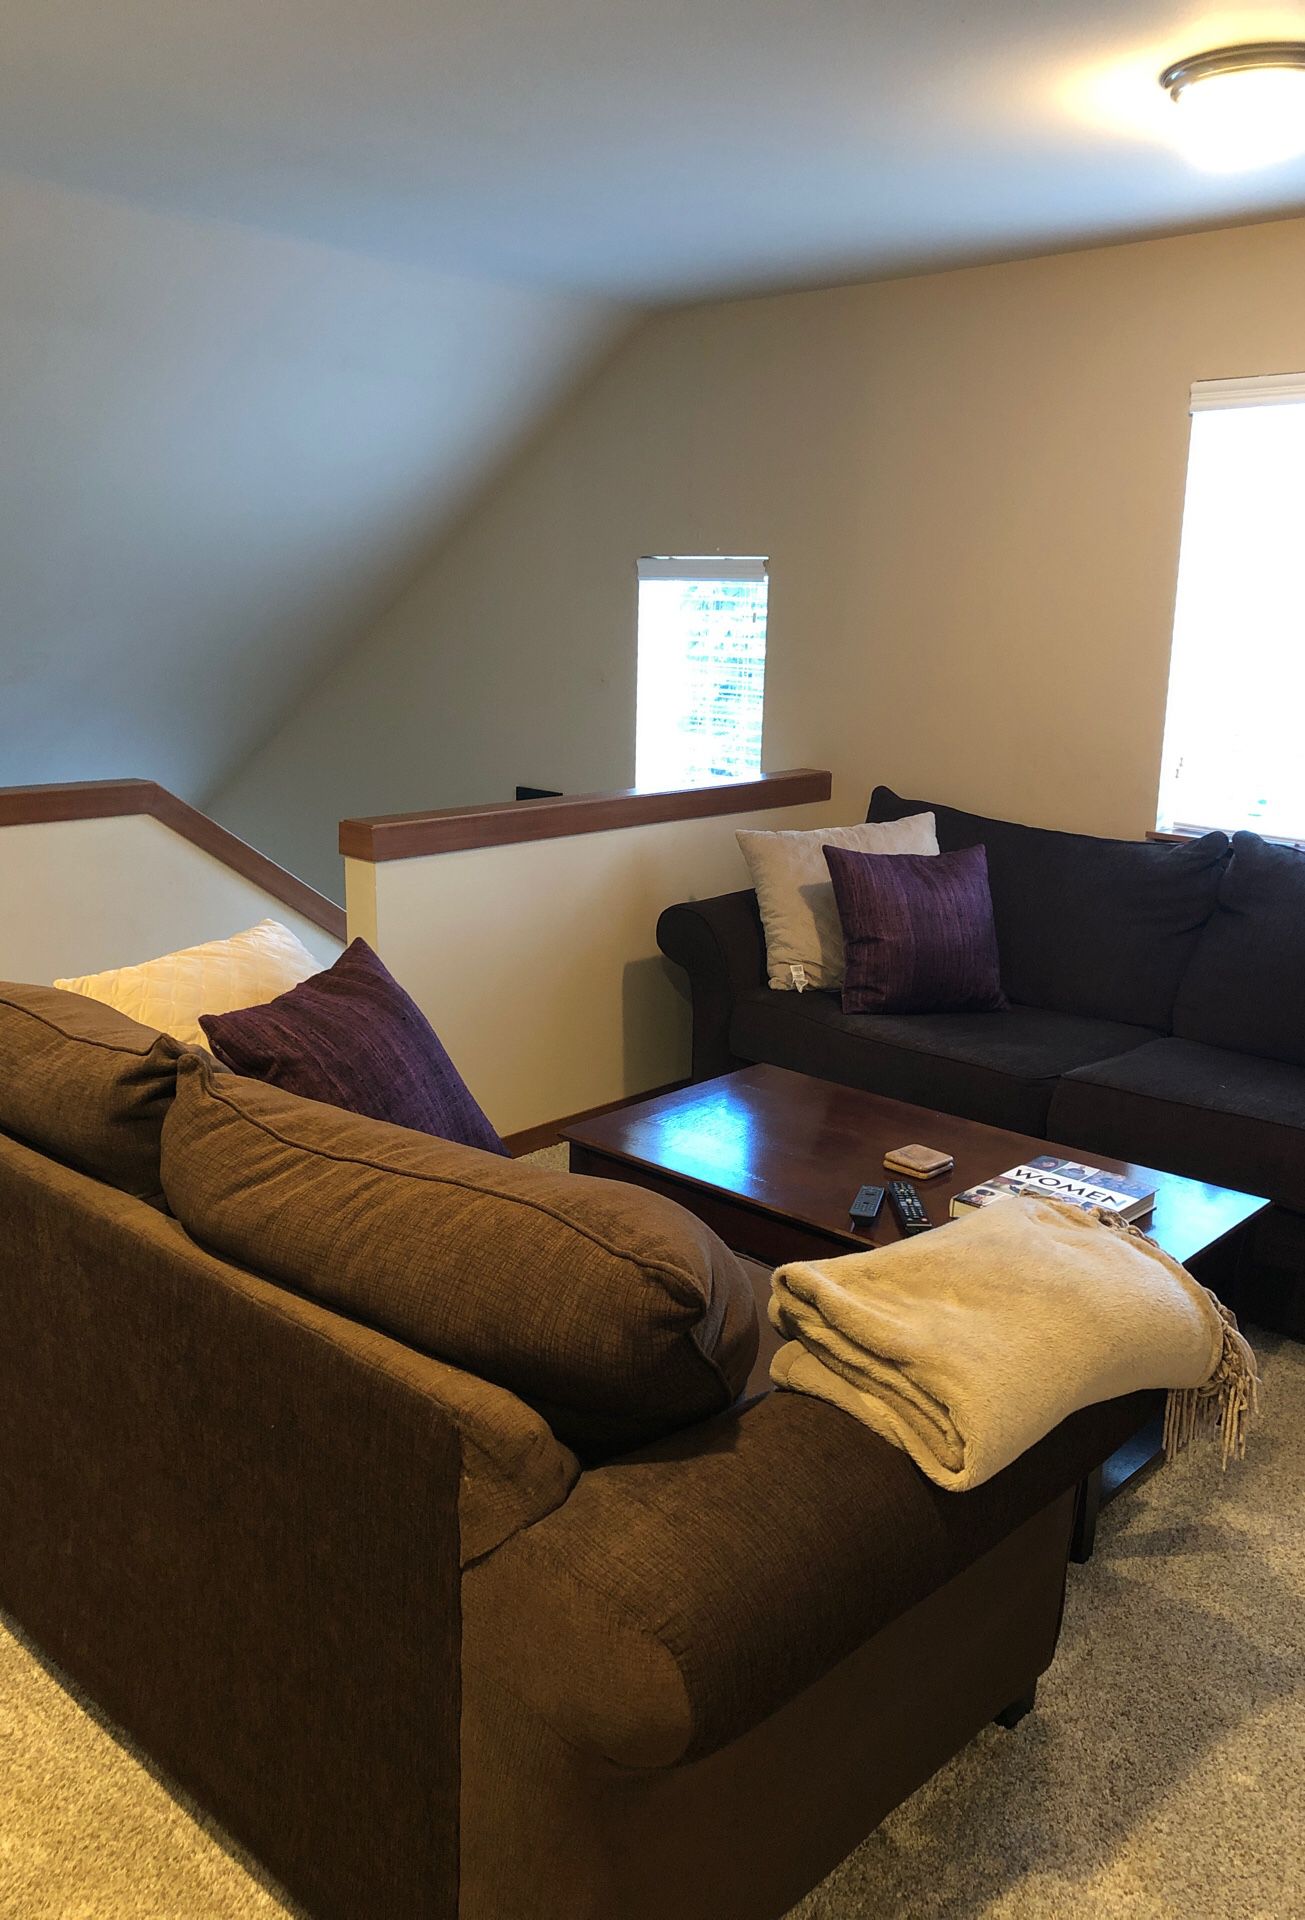 Couch, loveseat, coffee and end table